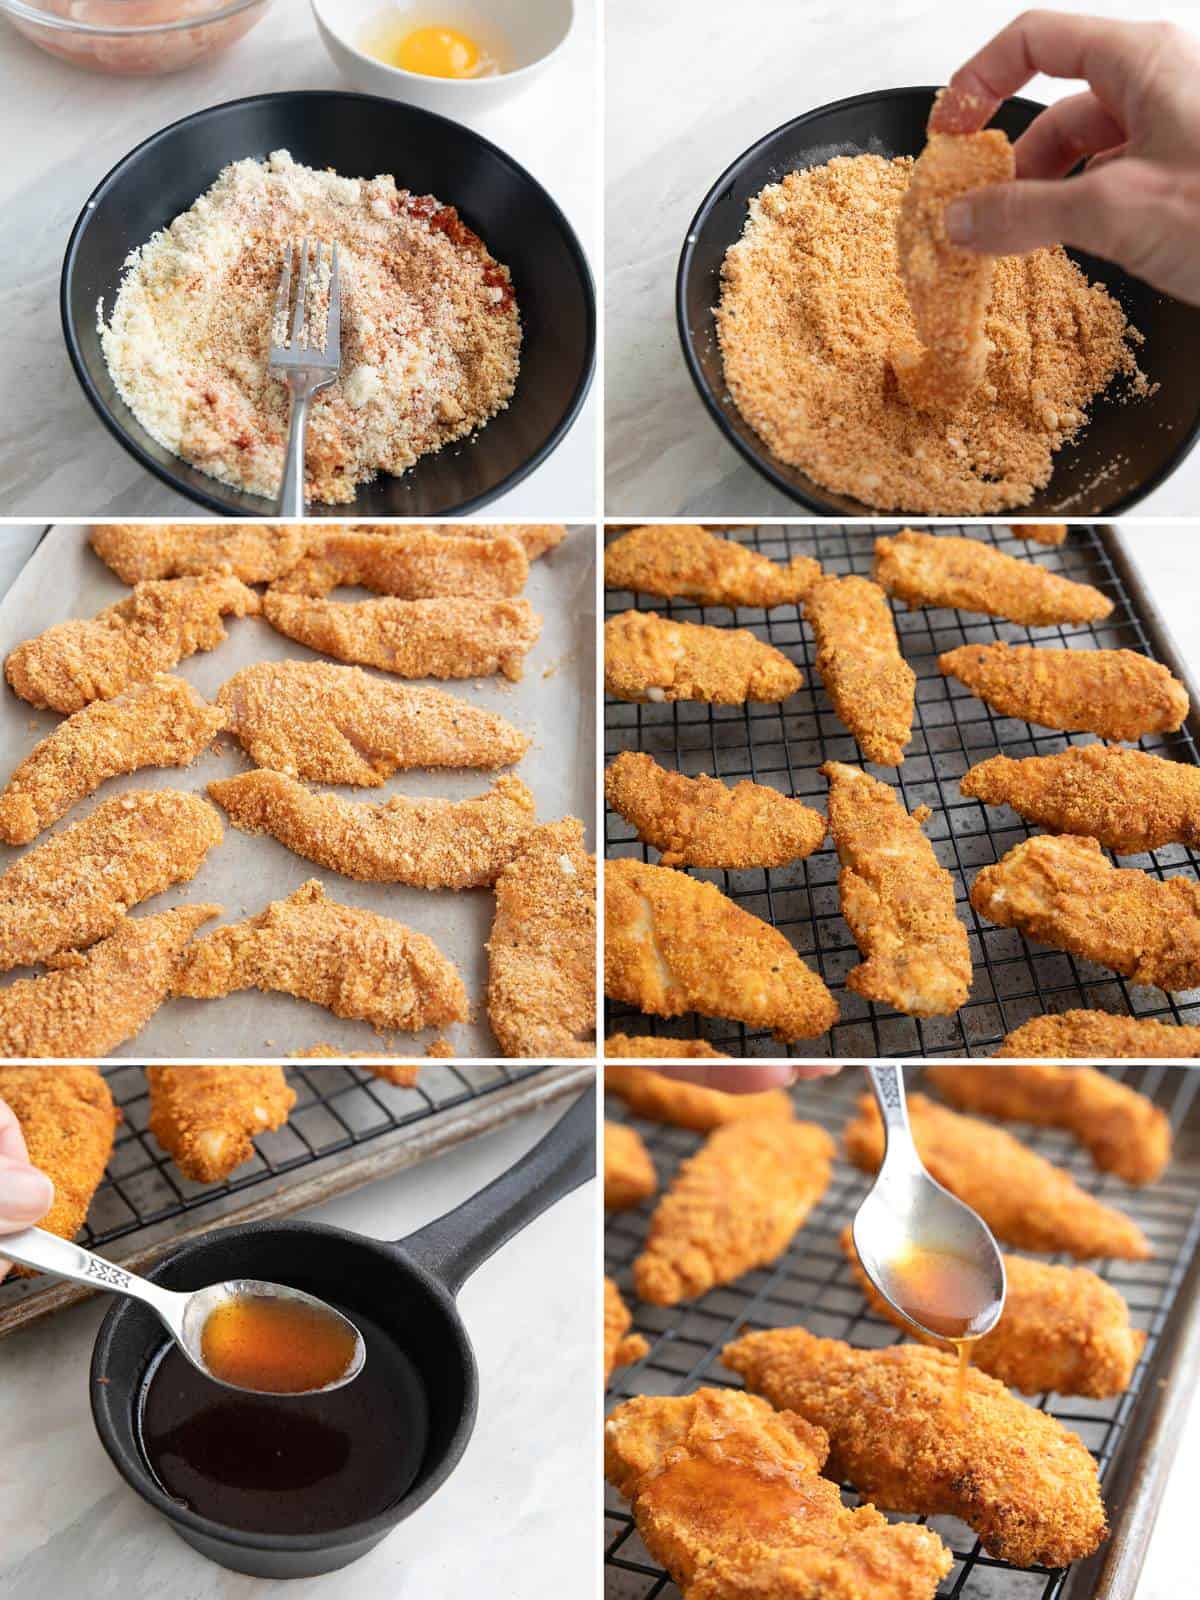 A collage of 6 images showing how to make Keto Chicken Tenders.